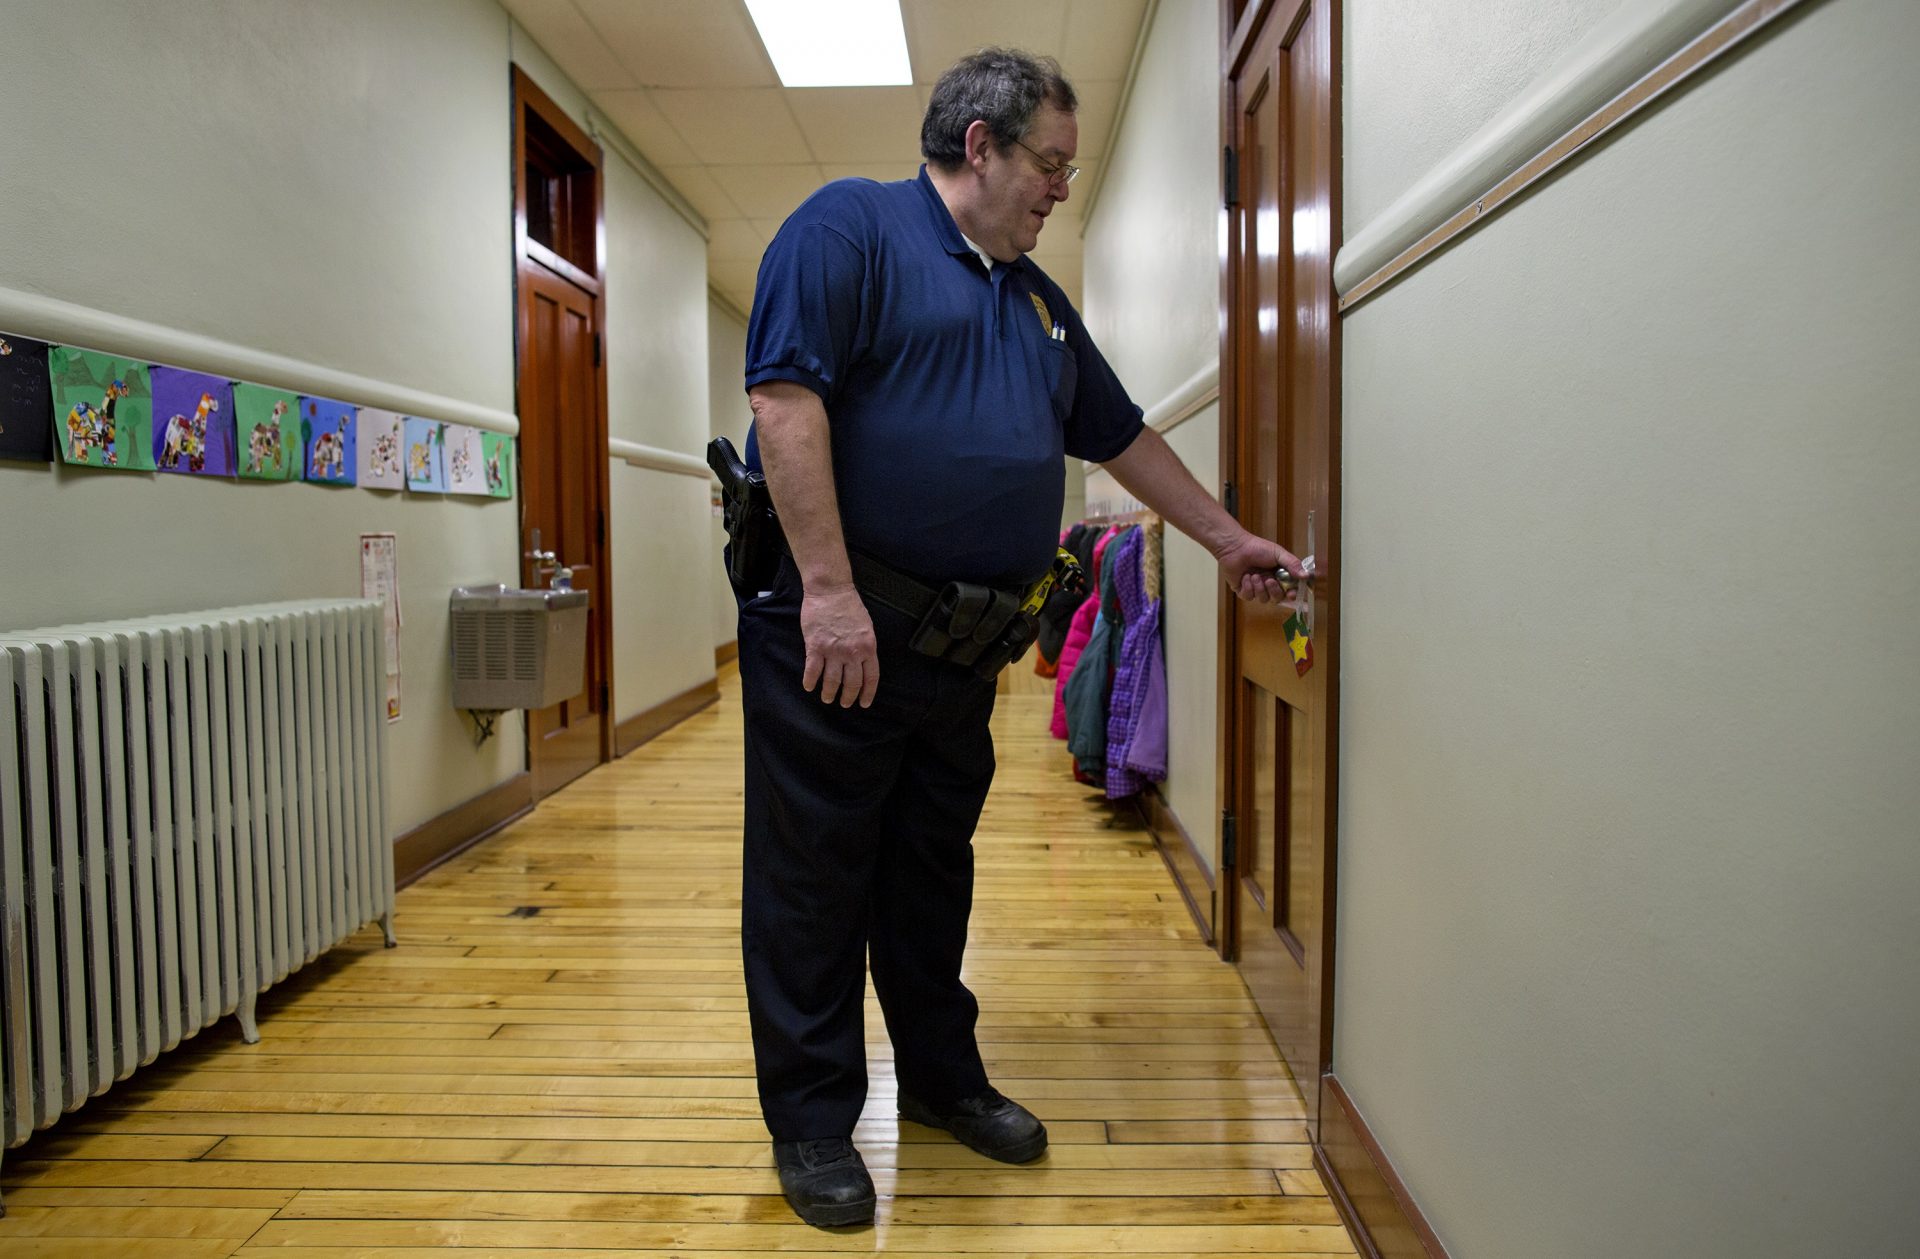 FILE - In this file photo of Jan. 14, 2013, New Washington, Ohio, Chief of Police Scott Robertson checks a teacher's door to make sure it's locked during a lockdown drill at the St. Bernard School in New Washington, Ohio, a month after the Sandy Hook Elementary School massacre in Newtown, Conn., that killed 26 people in December. Inspired by the memories of those who lost their lives, St. Bernard School's principal decided to hold lockdown drills on the 14th of each month to refine a safety plan and increase school security.